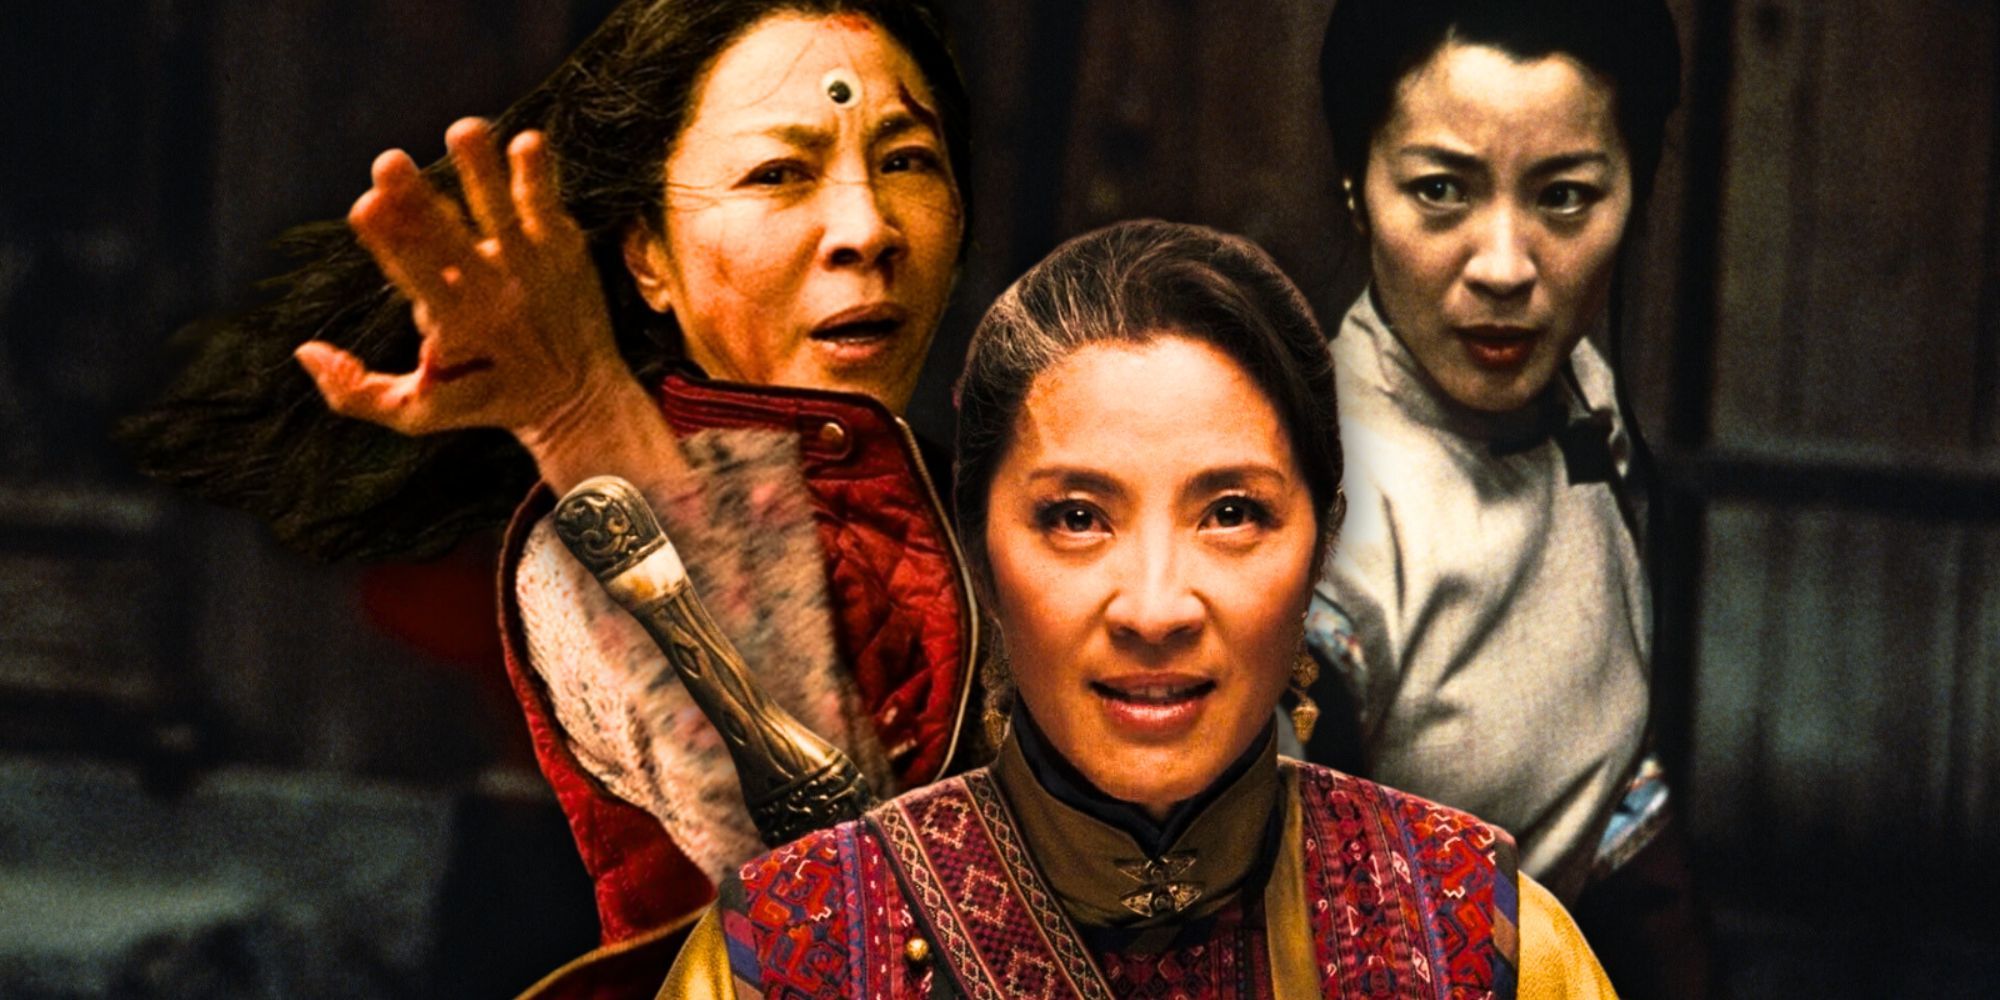 Michelle Yeoh in Everything Everywhere All at Once, Mummy 3 and Crouching Tiger, Hidden Dragon